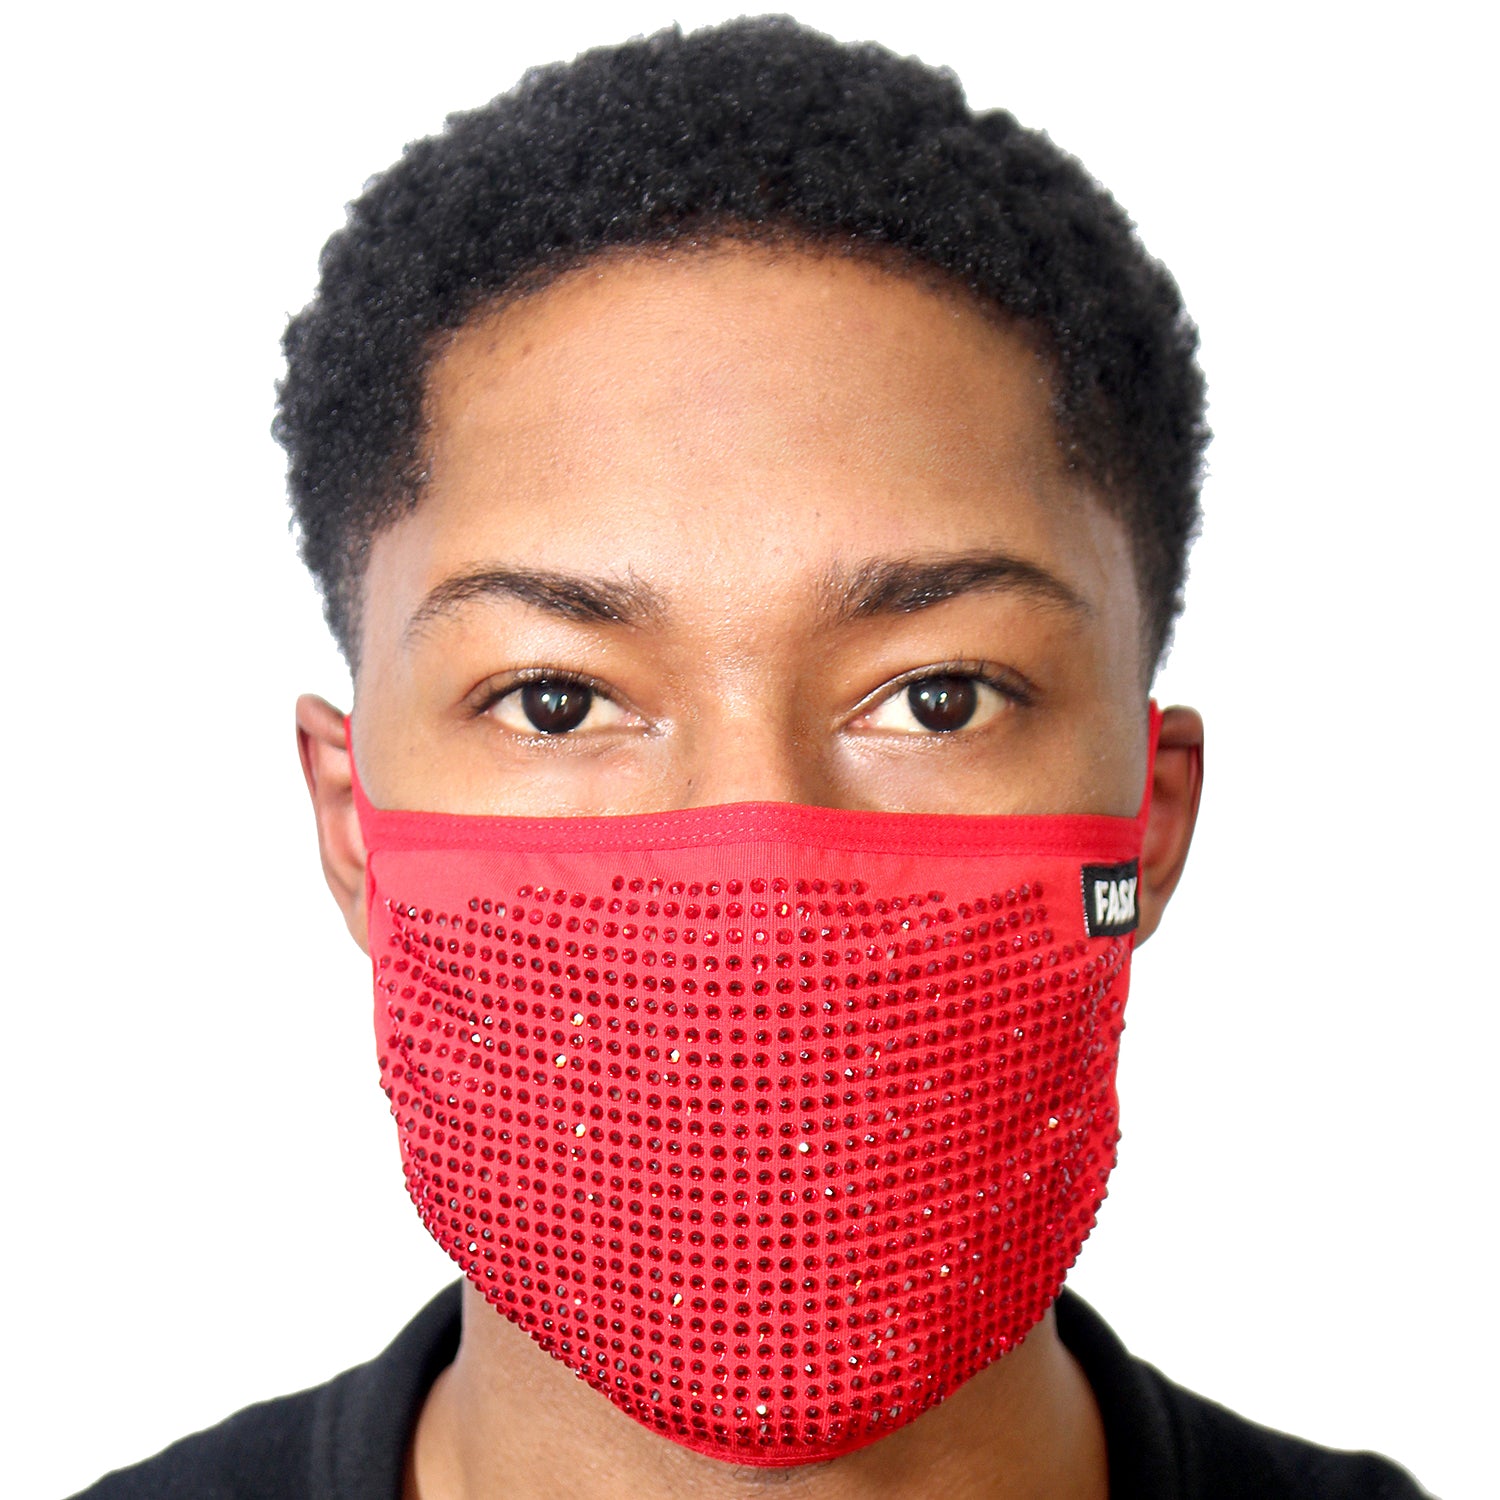 FASK Full Stoned Cotton 2.0 Stoned Mask with Interchangeable Filter and Adjustable Size Strap